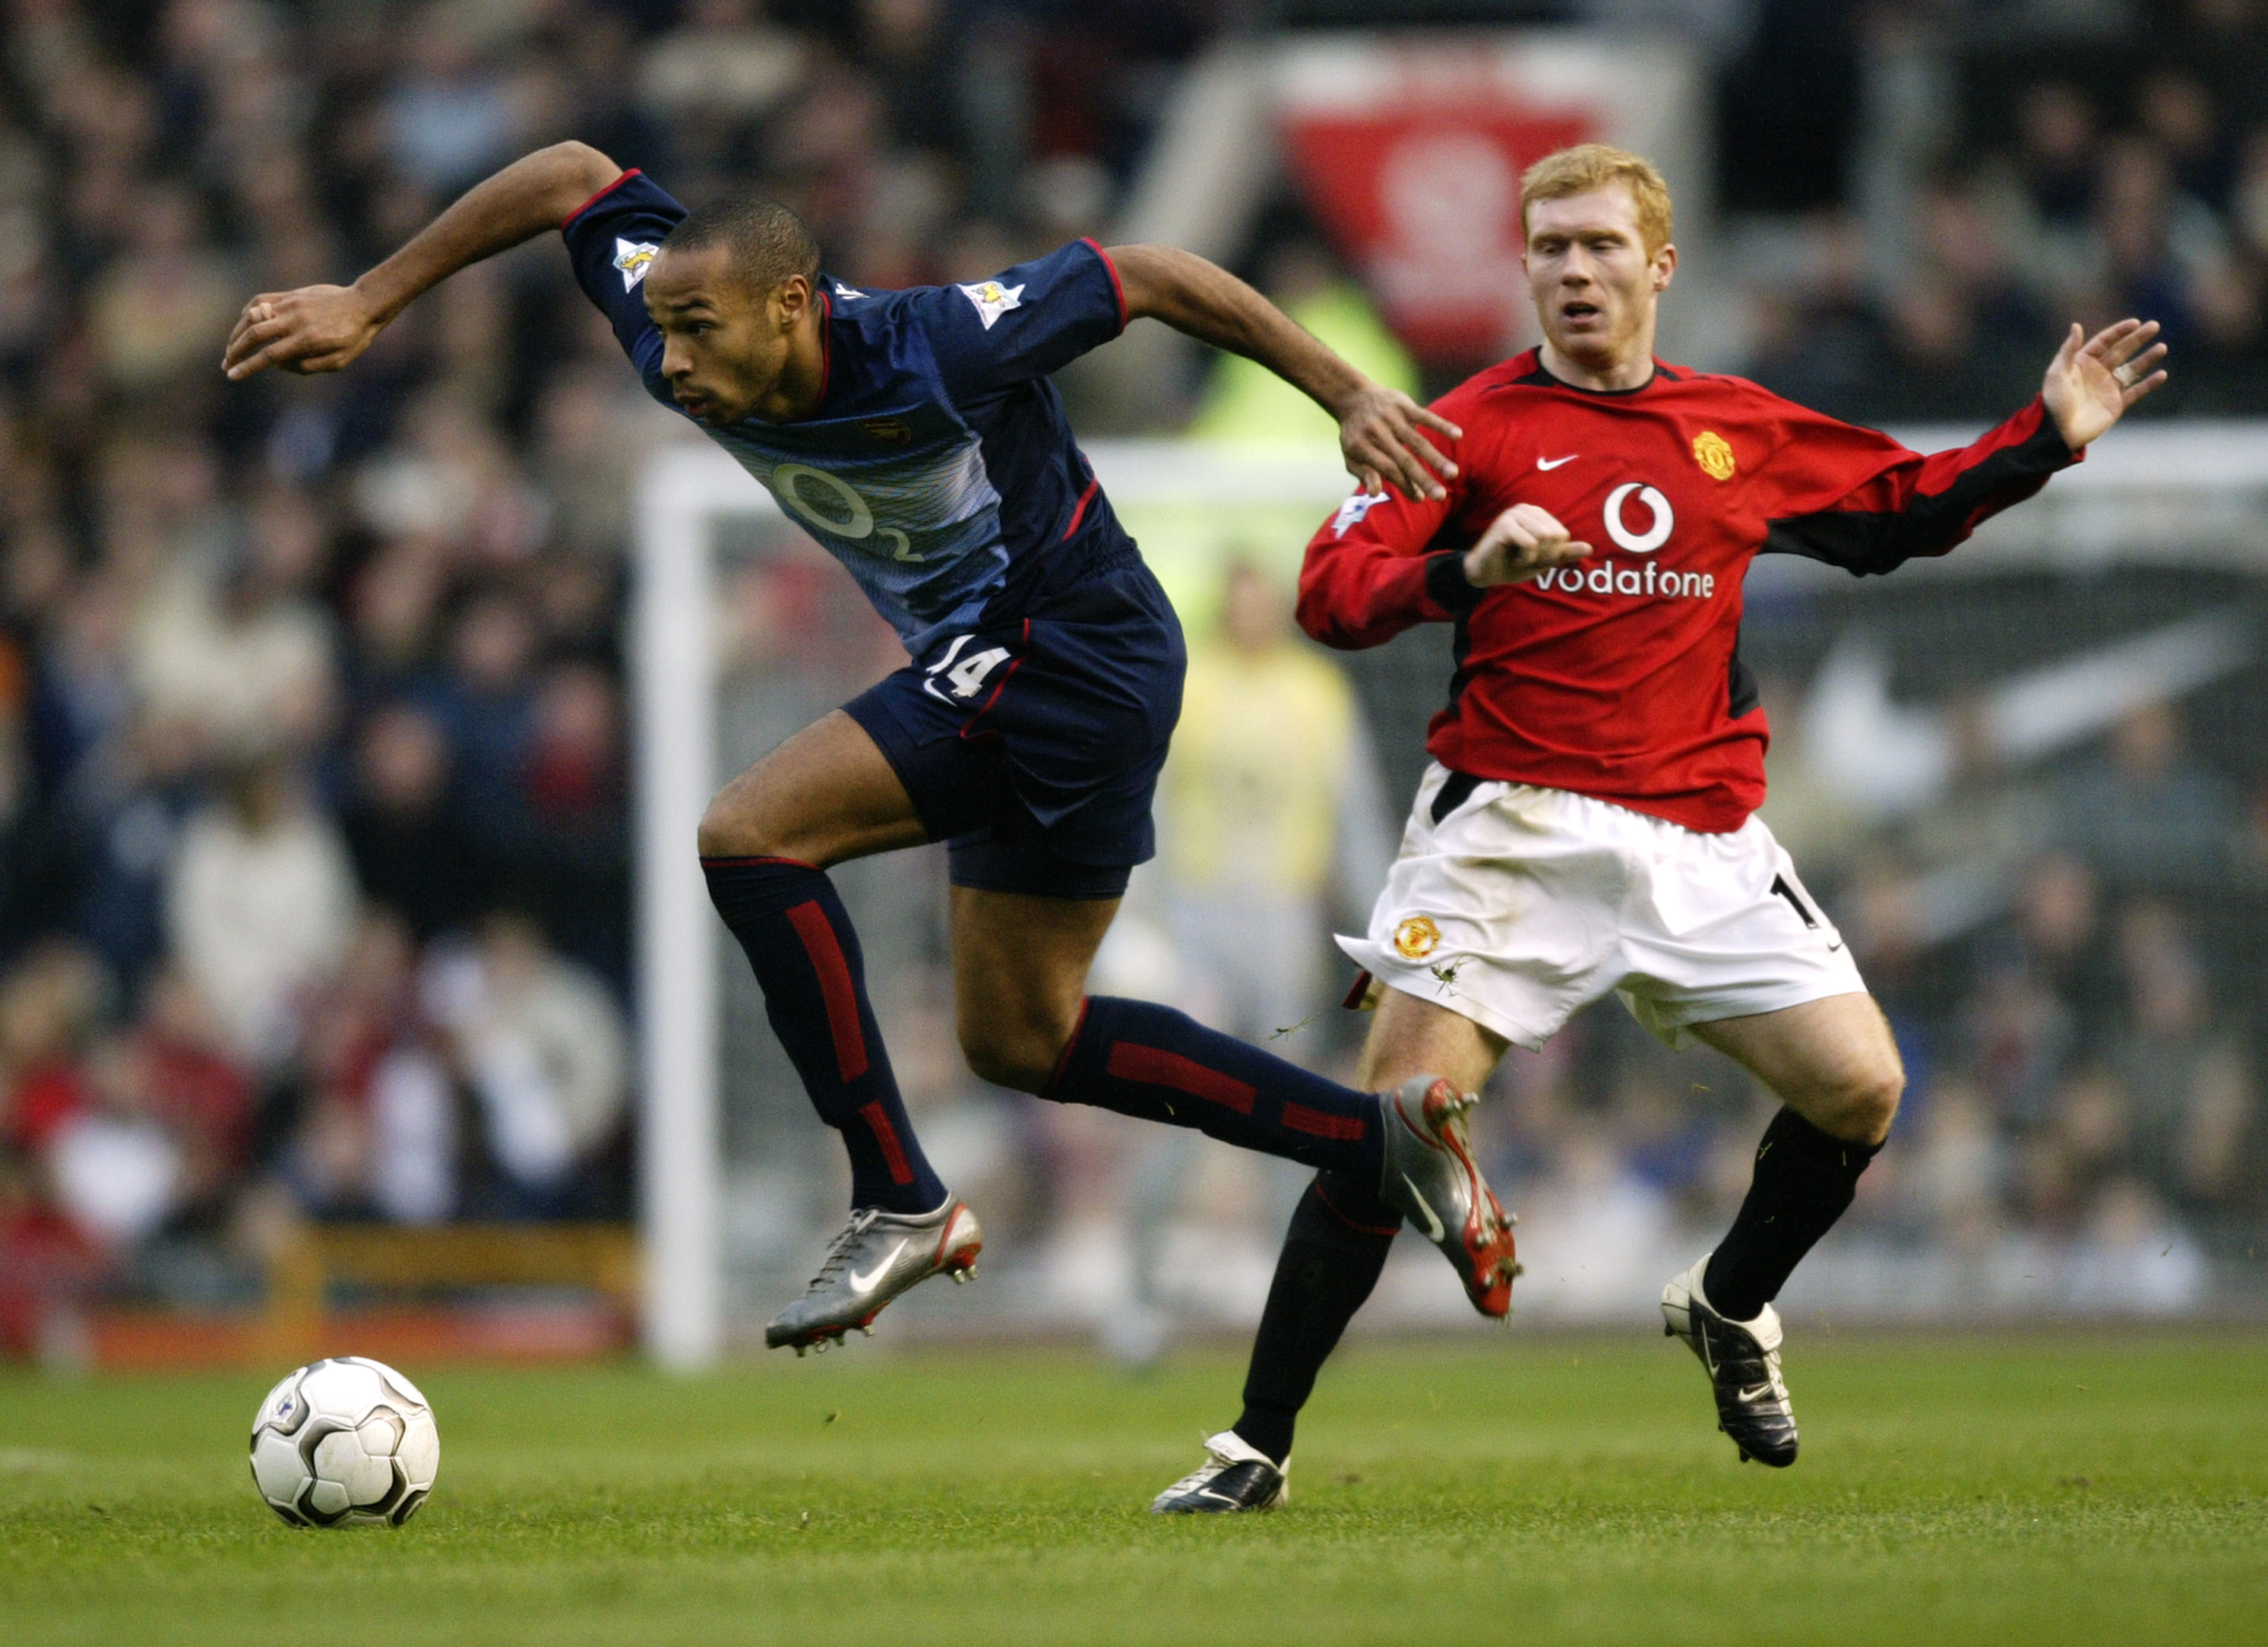 Arsenal icon Thierry Henry responds to Van Nistelrooy's rivalry comments, Football